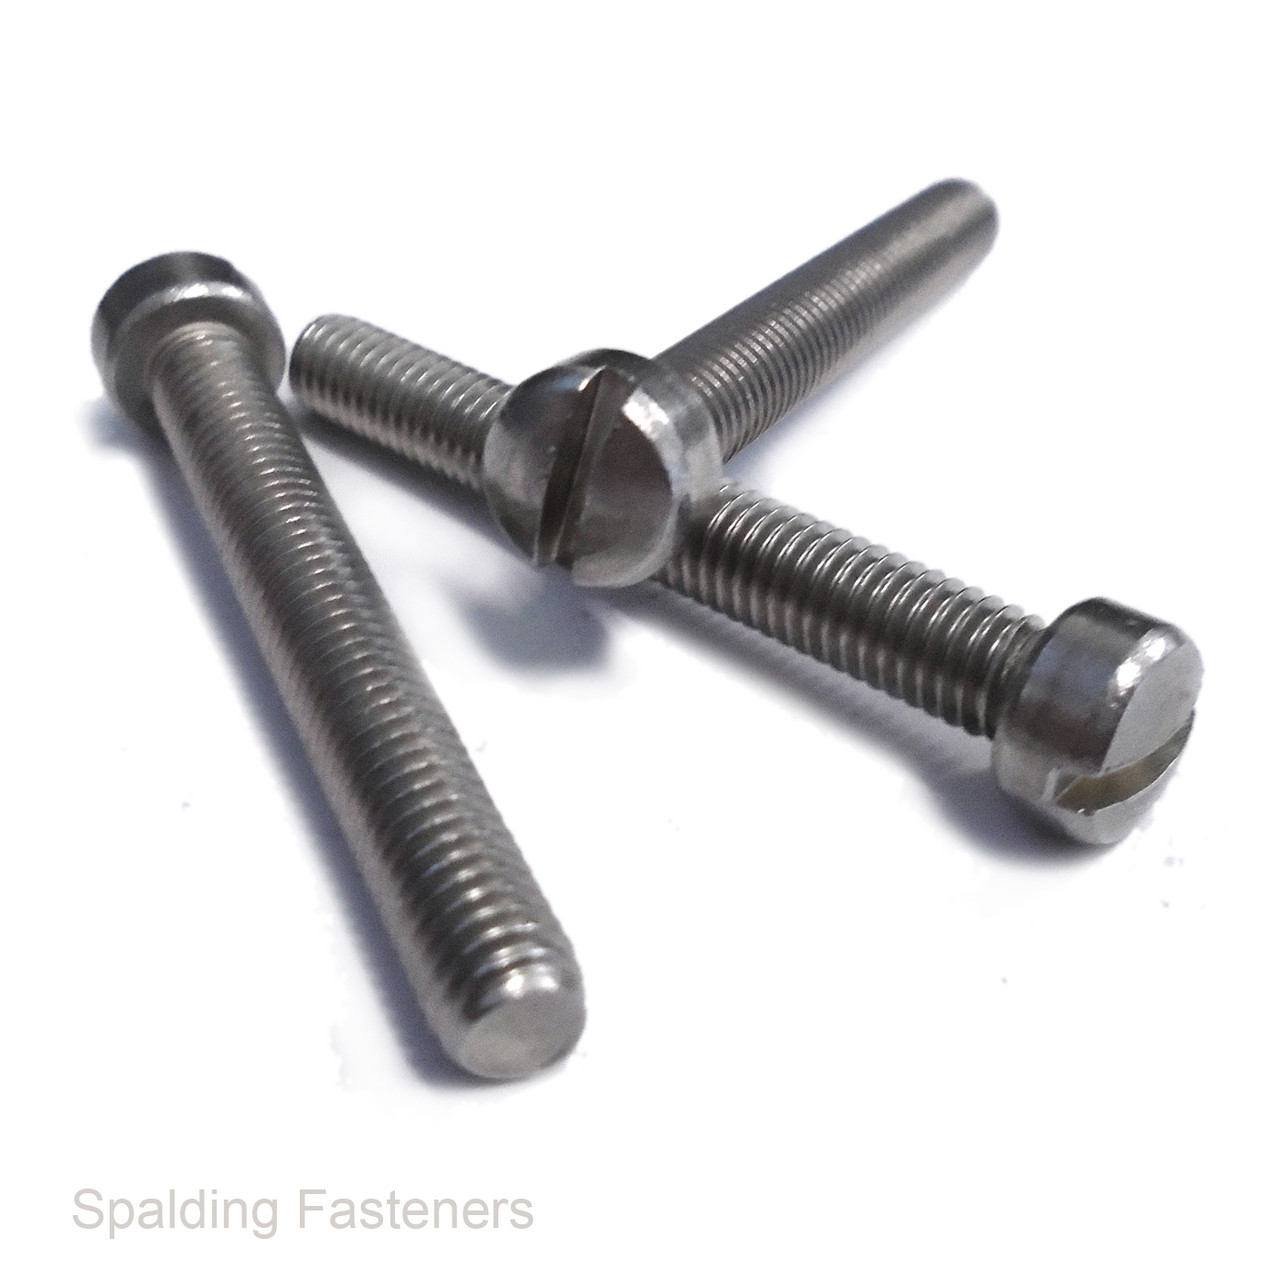 10-32 FILLISTER SLOTTED UNF A2 STAINLESS STEEL MACHINE SCREWS